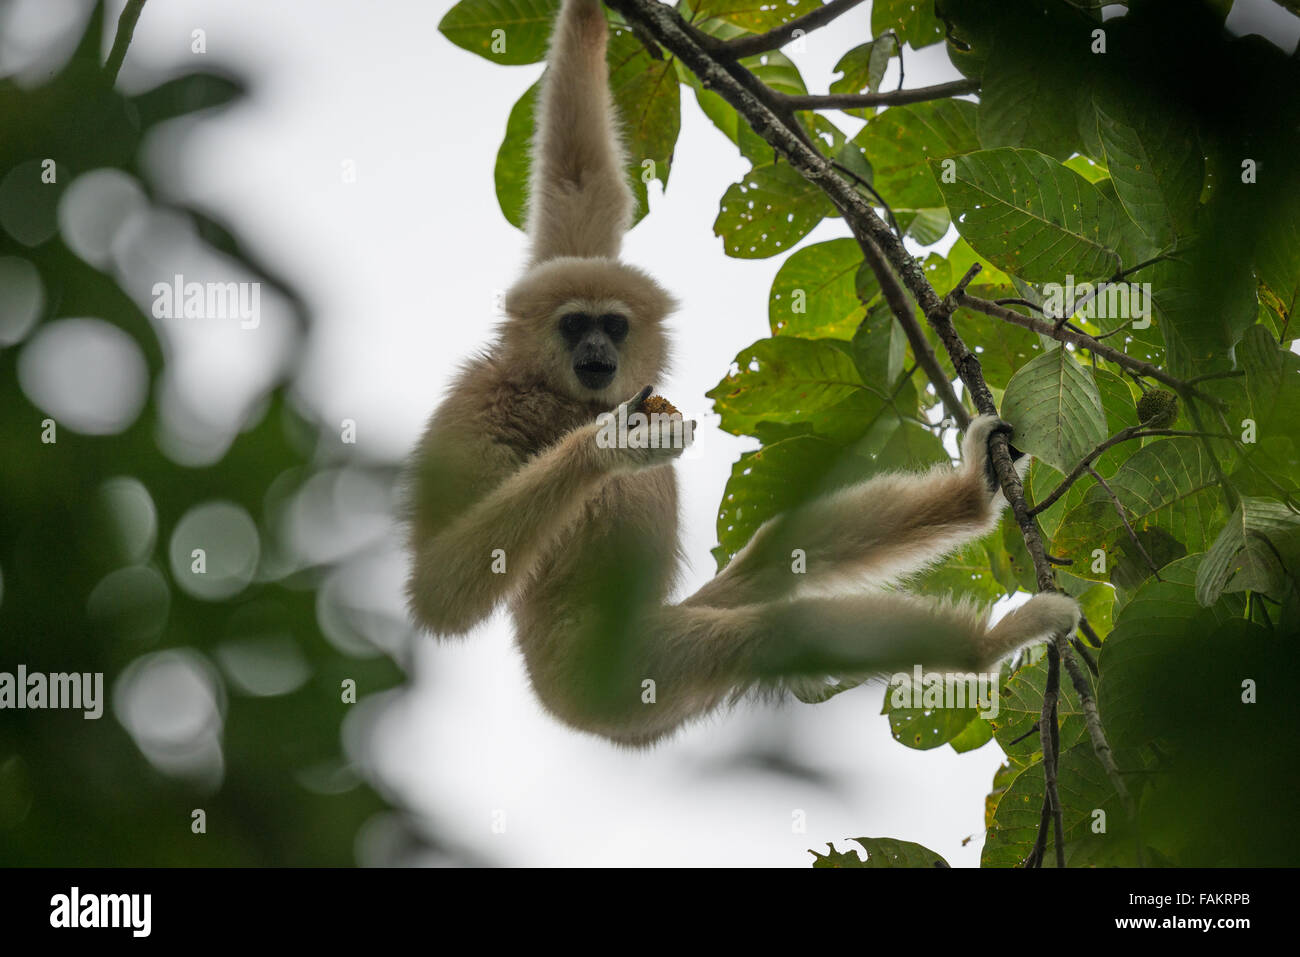 The lar gibbon (Hylobates lar), also known as the white-handed gibbon, is a primate in the Hylobatidae or gibbon family. Stock Photo